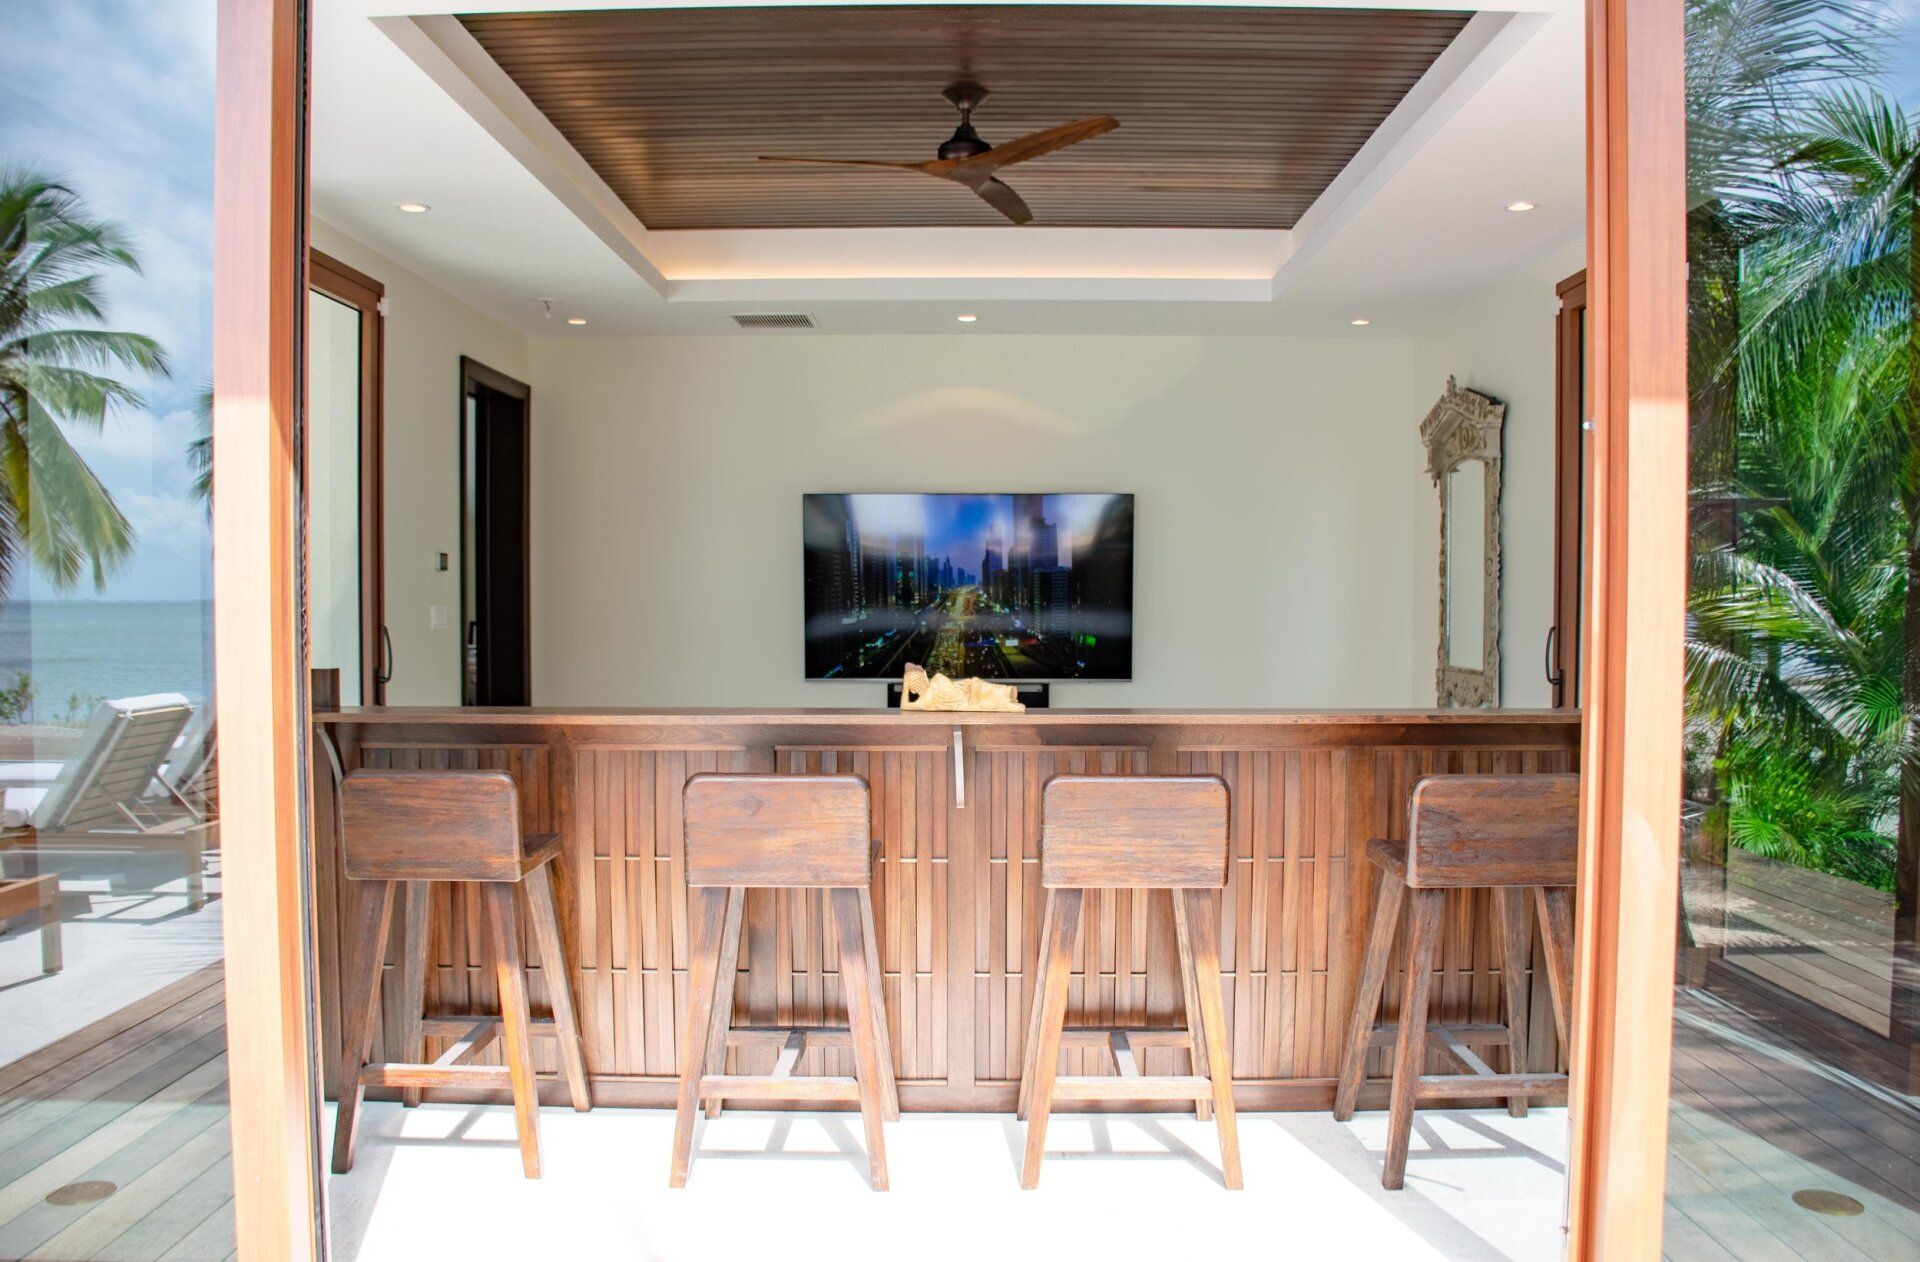 a bar with stools and a flat screen tv on the wall